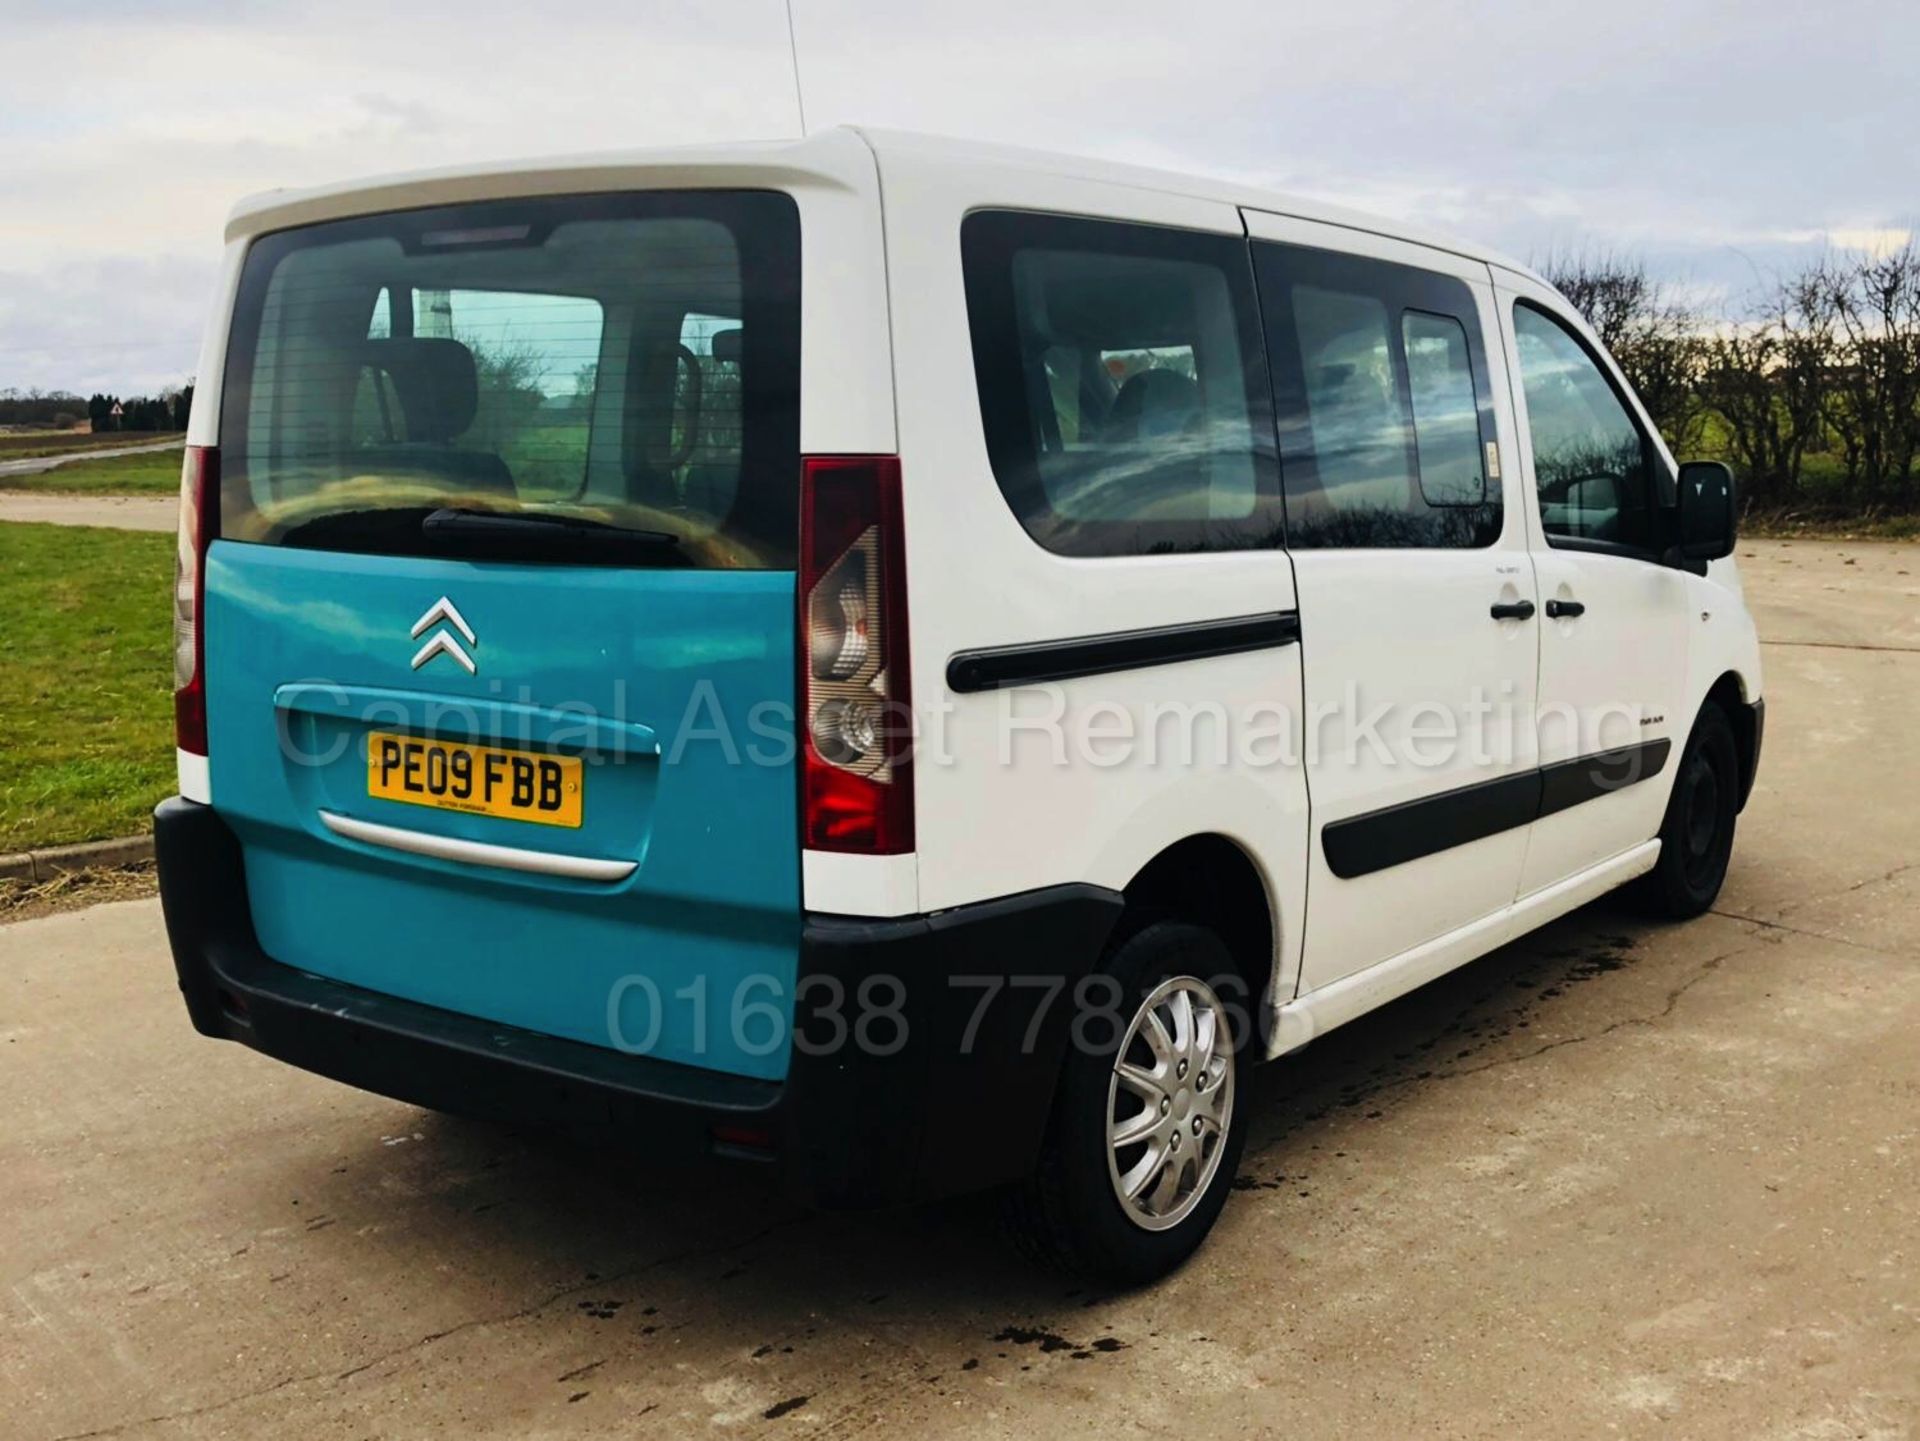 (On Sale) CITROEN DISPATCH LWB '9 SEATER BUS' (2009 - 09 REG) '2.0 HDI -120 BHP - 6 SPEED' *AIR CON* - Image 5 of 20